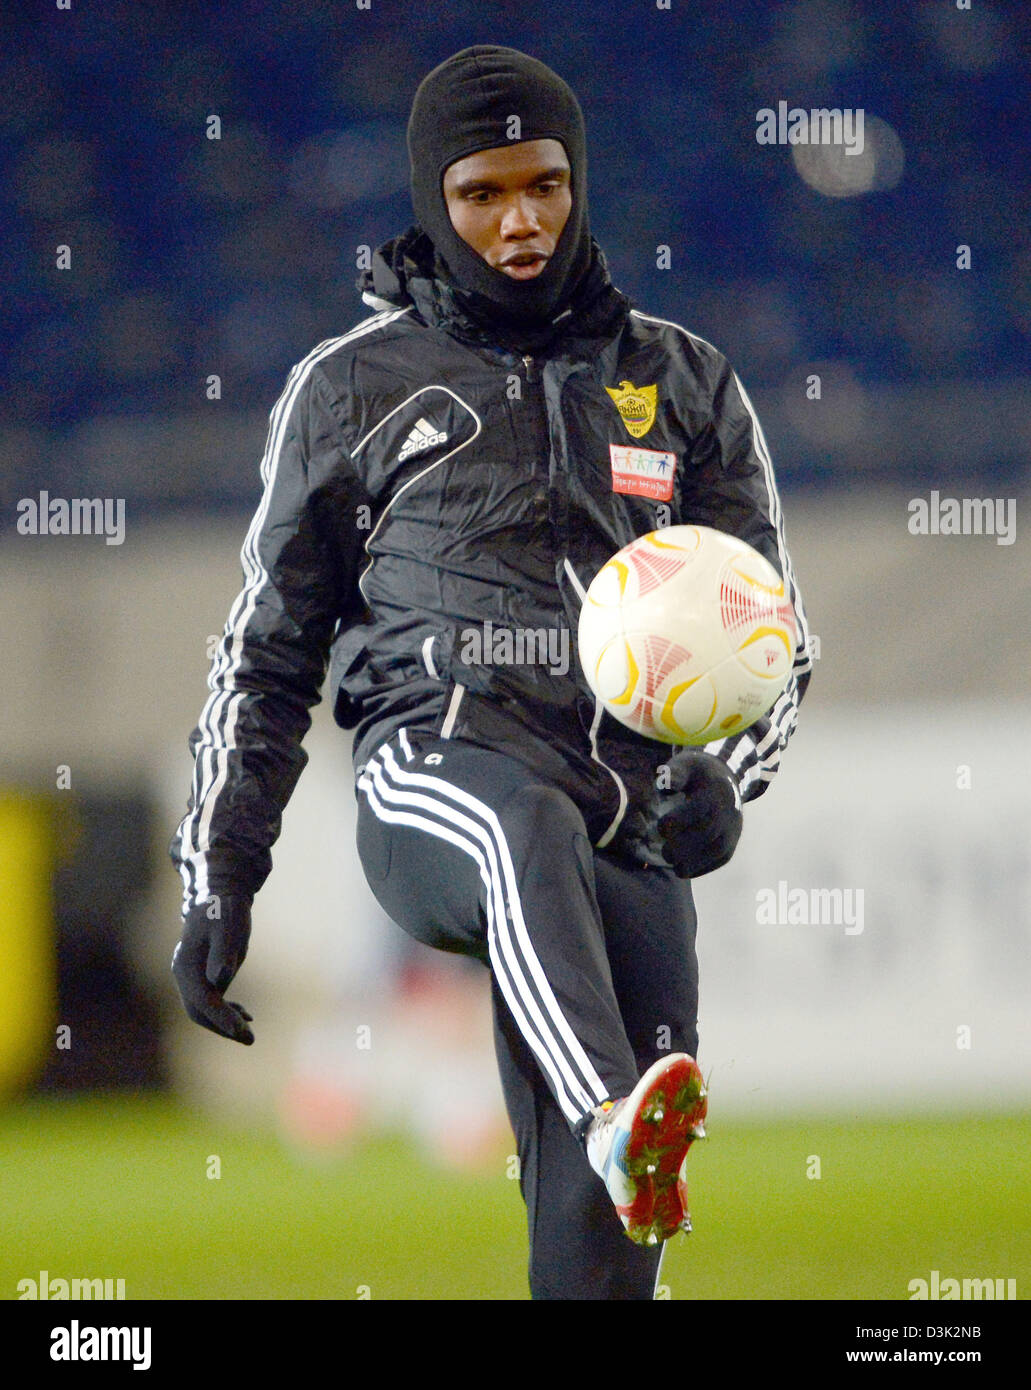 Player of soccer club FC Anzhi Makhachkala, Samuel Eto'o, plays the ball during a training session for the Europa League soccer match between Hannover 96 at AWD Arena in Hanover, Germany, 20 February 2013. Hannover 96 will play Anzhi Makhachkala on 21 February 2013. Photo: PETER STEFFEN Stock Photo